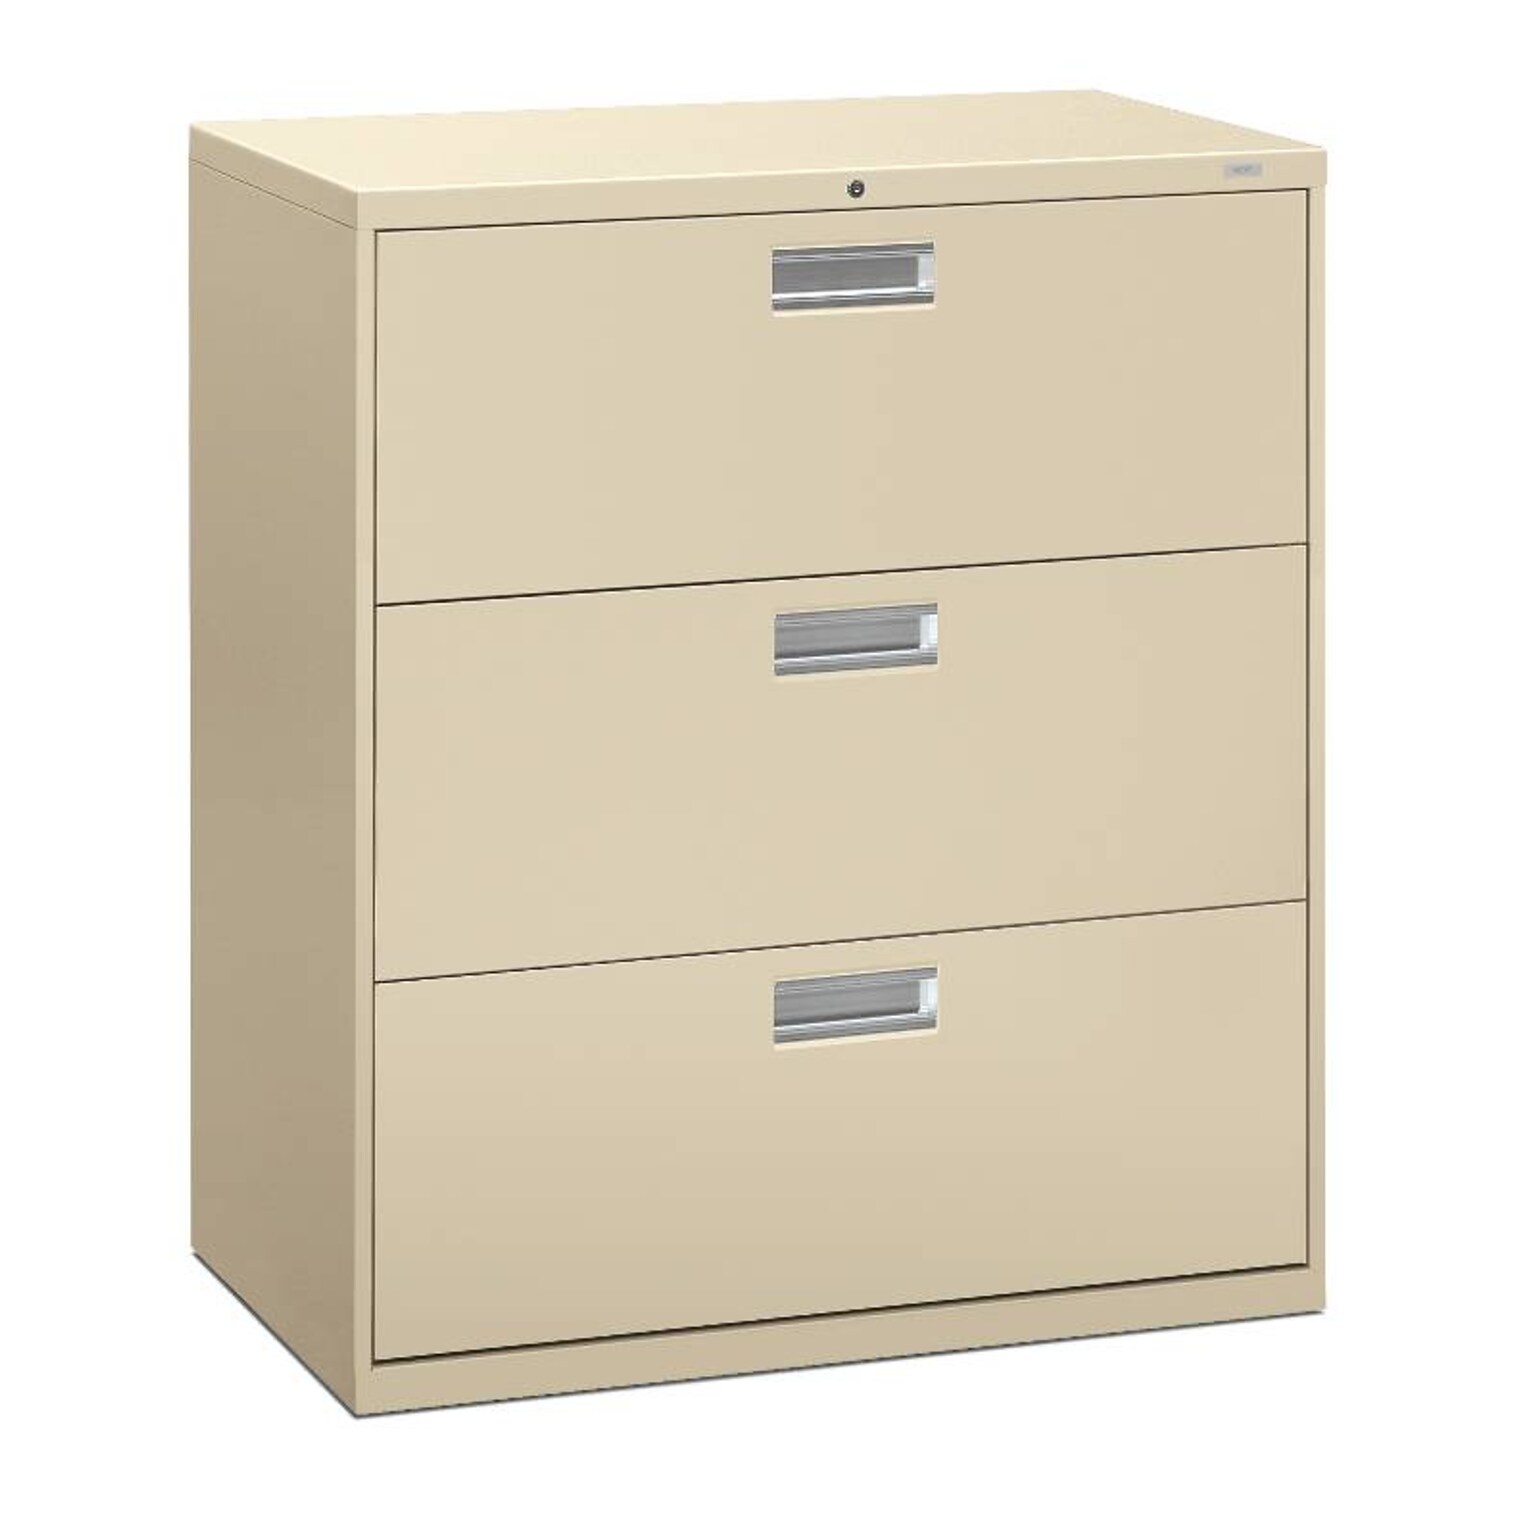 HON Brigade 600 Series 3-Drawer Lateral File Cabinet, Letter/Legal Size, Lockable, 40.94H x 36W x 18D, Putty (HON683LL)